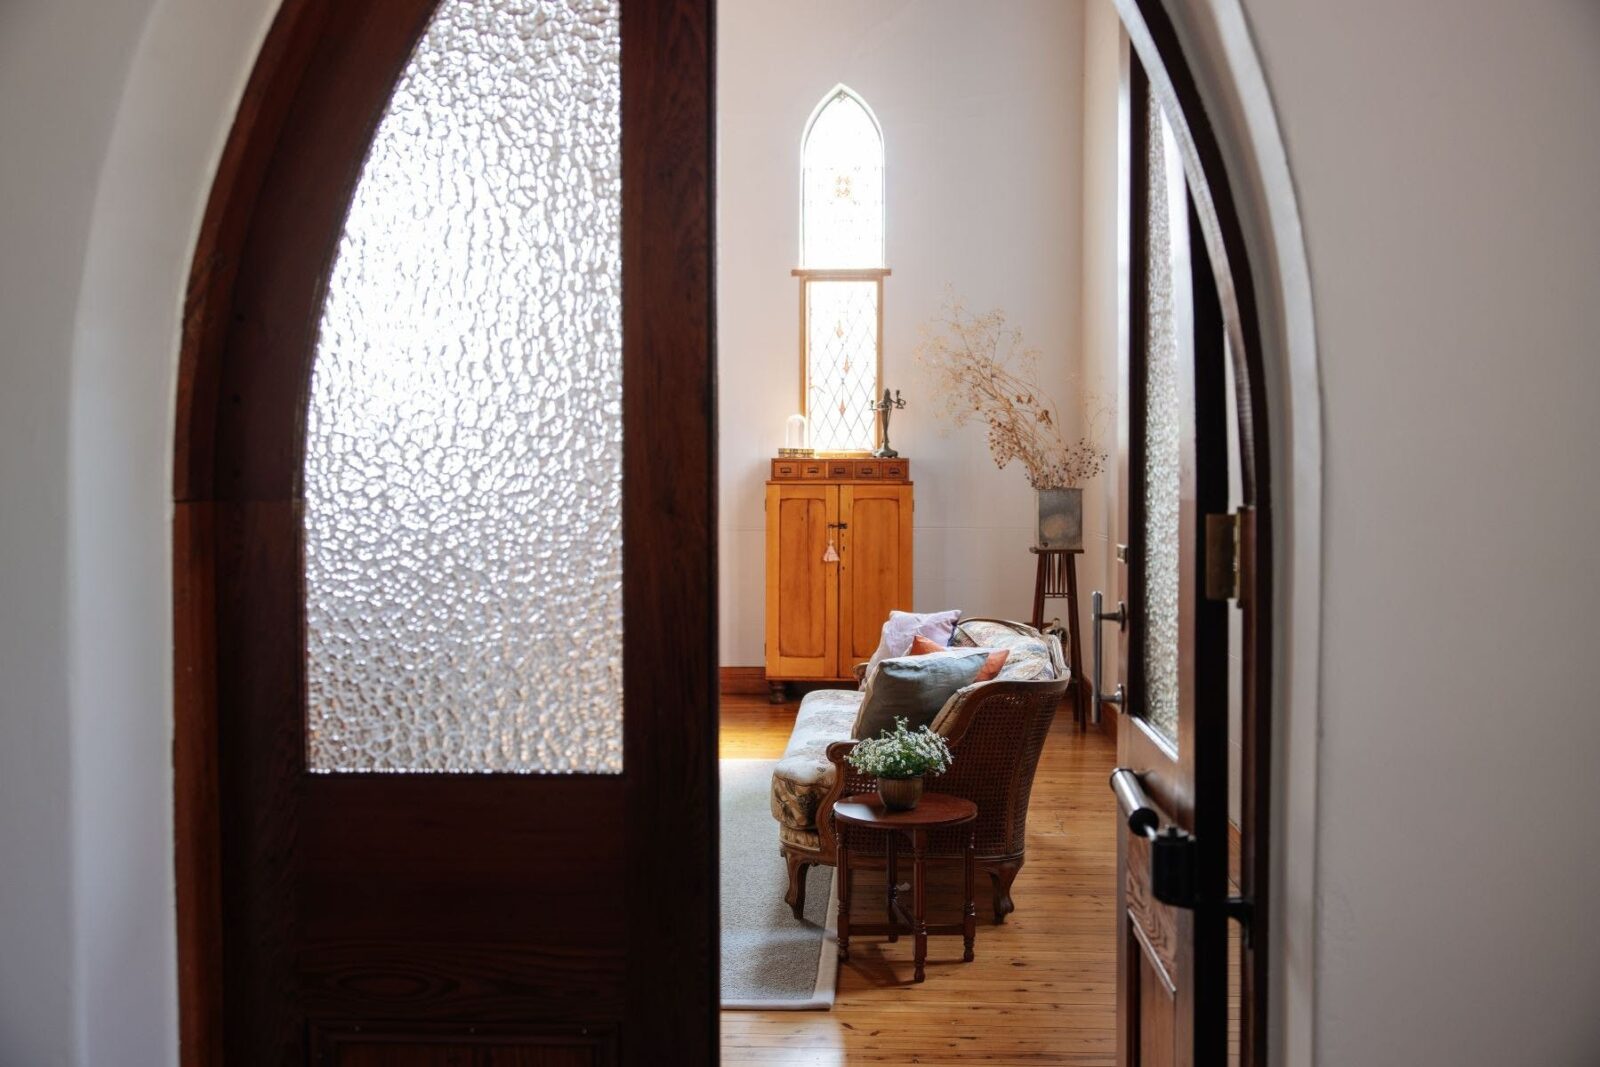 Walk through the entrance/ vestry, and the double Gothic doors open onto the living area.